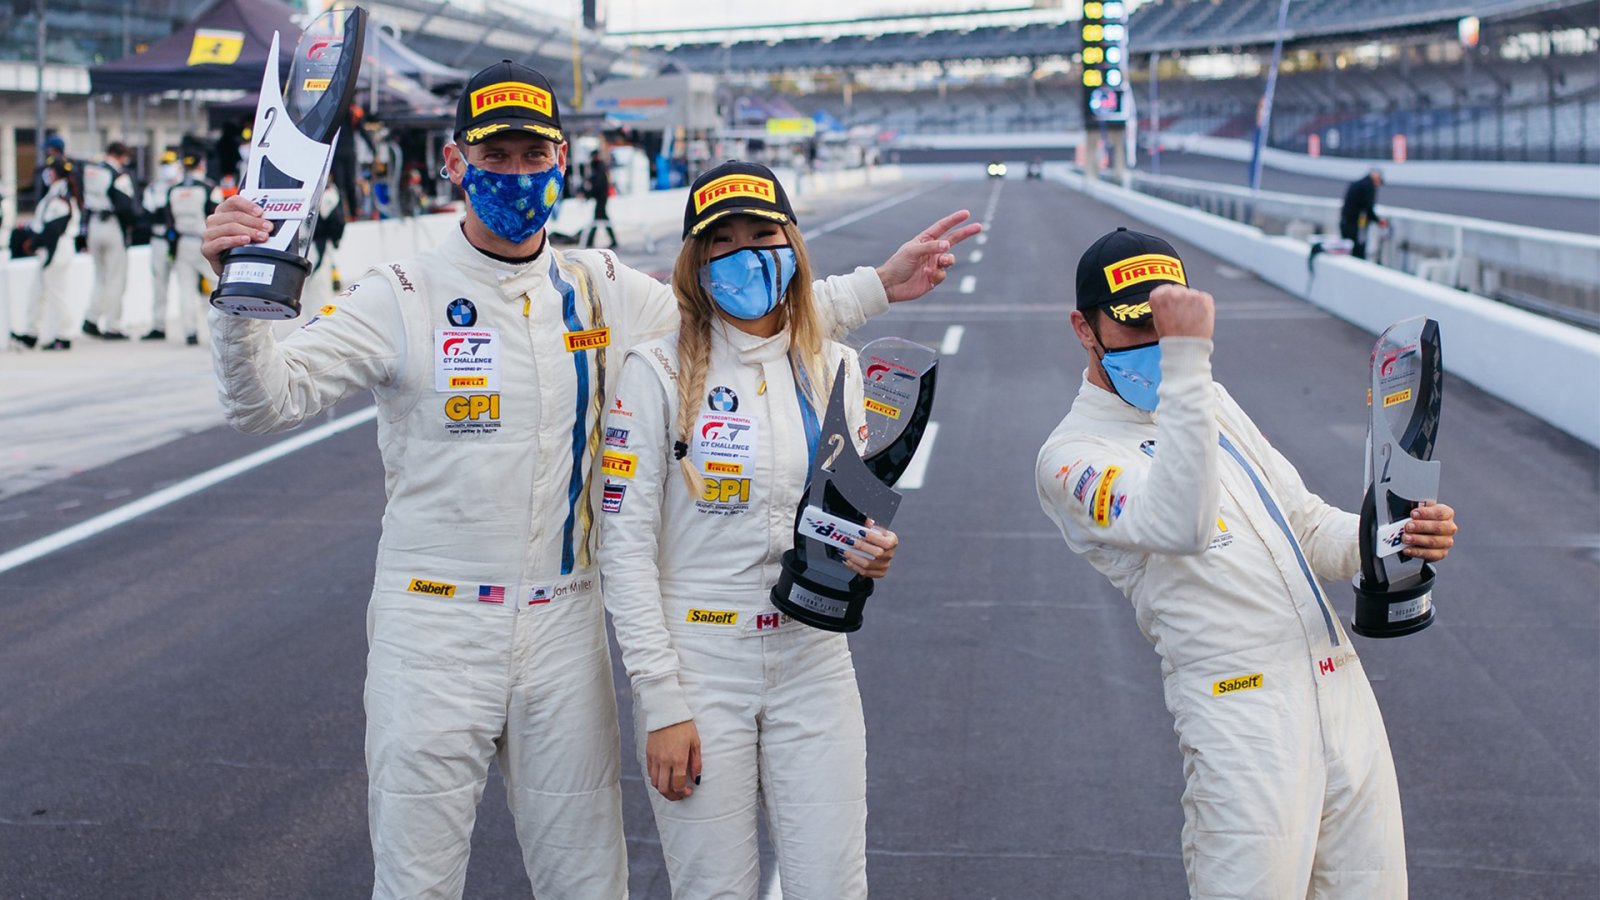 ST Racing Scores 2nd Place in GT4 Class During Action-packed Indy 8-Hour Race